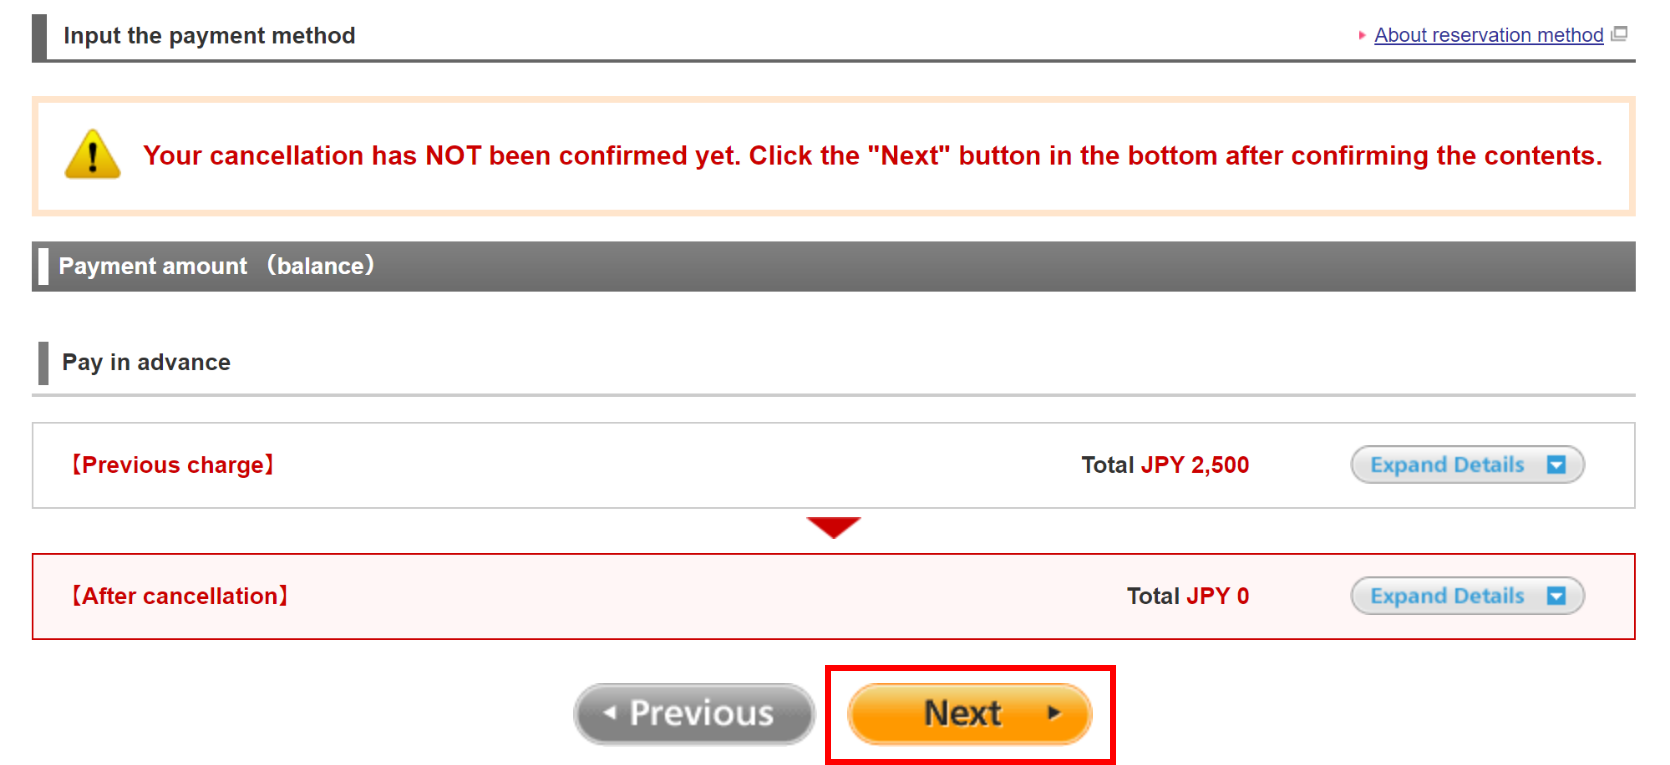 Confirm the details of the cancellation and click the 'Confirm and complete the cancellation' button.